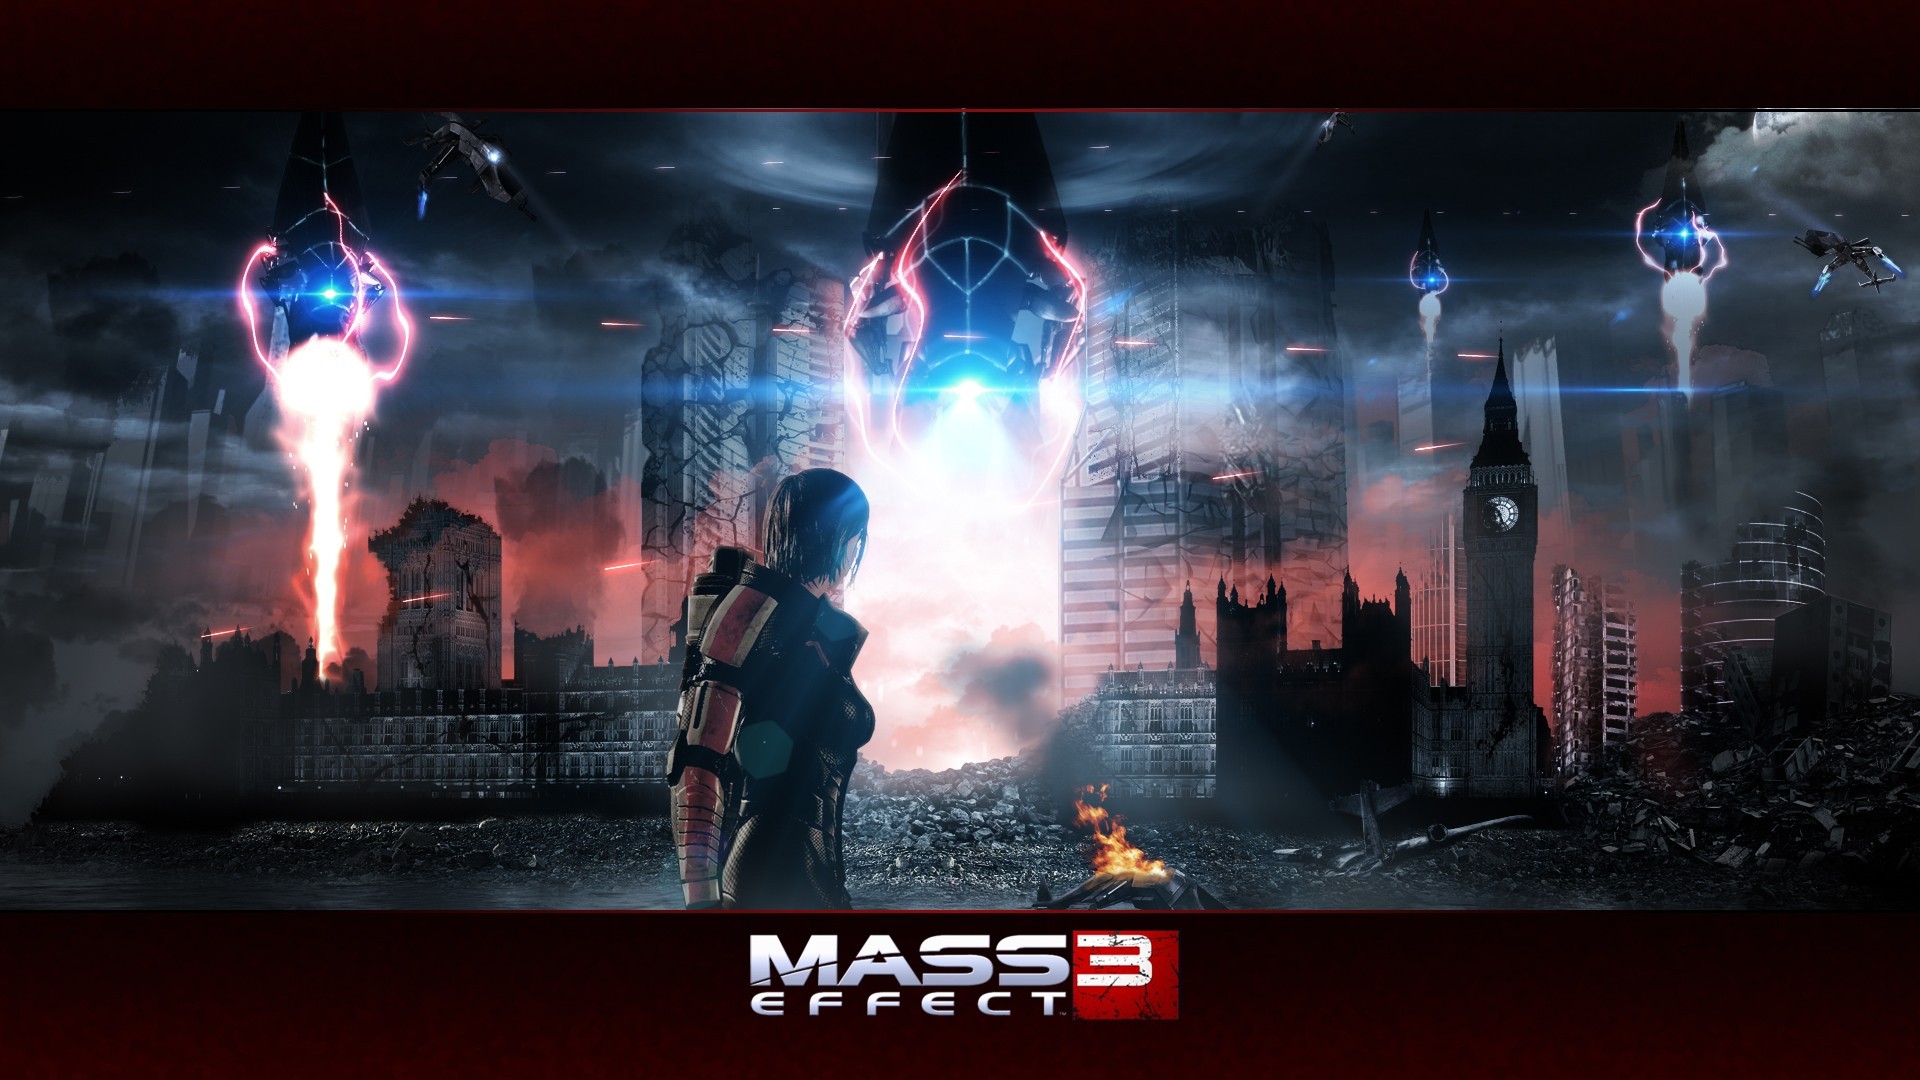 General 1920x1080 Mass Effect 3 video games Bioware science fiction Electronic Arts PC gaming